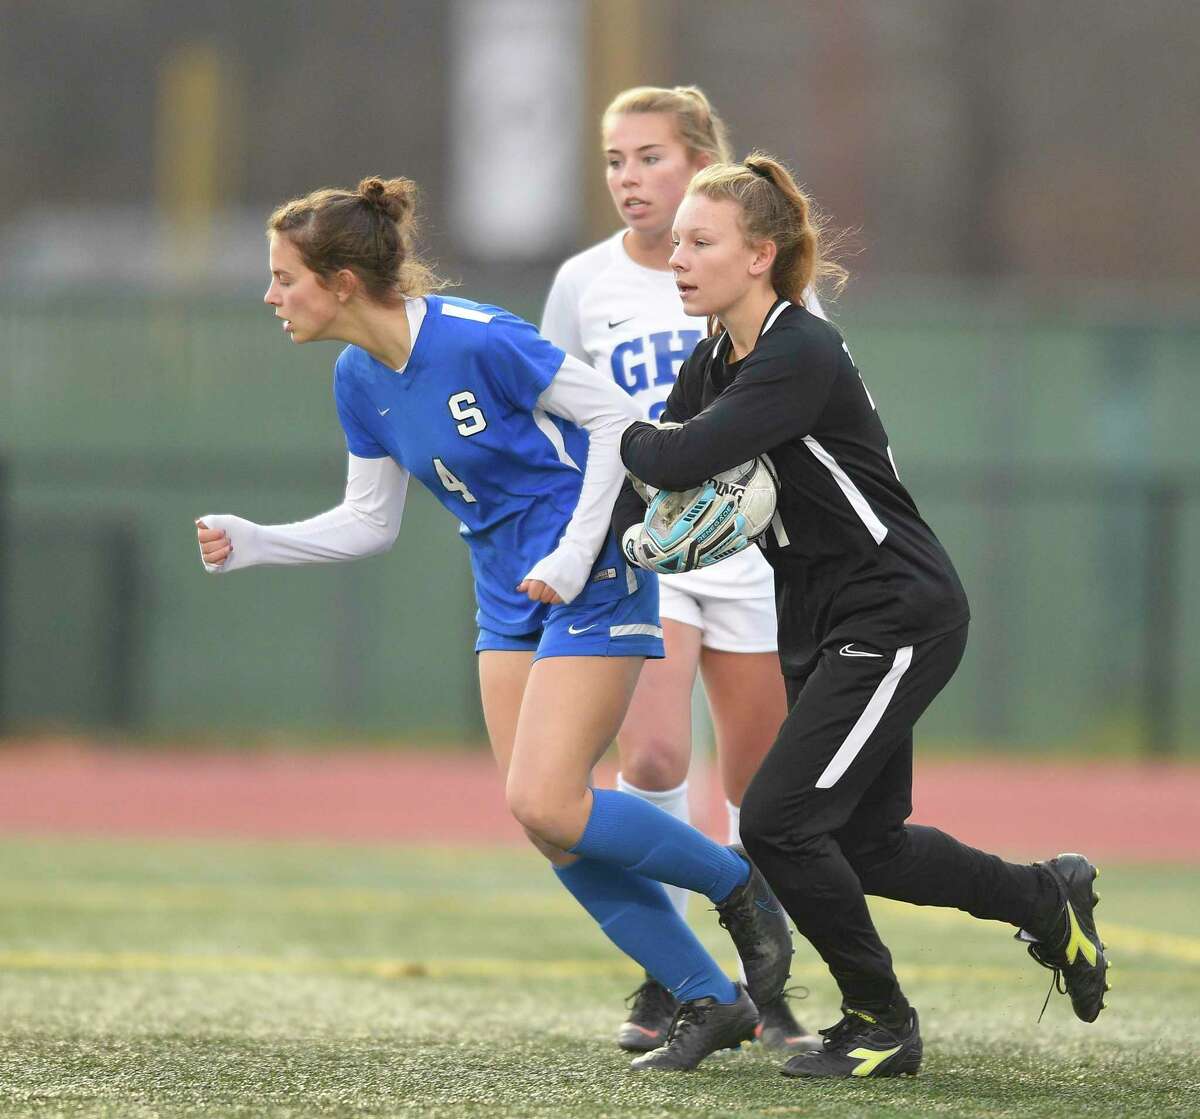 25 Ciac Girls Soccer Players To Watch For The 2021 Season 